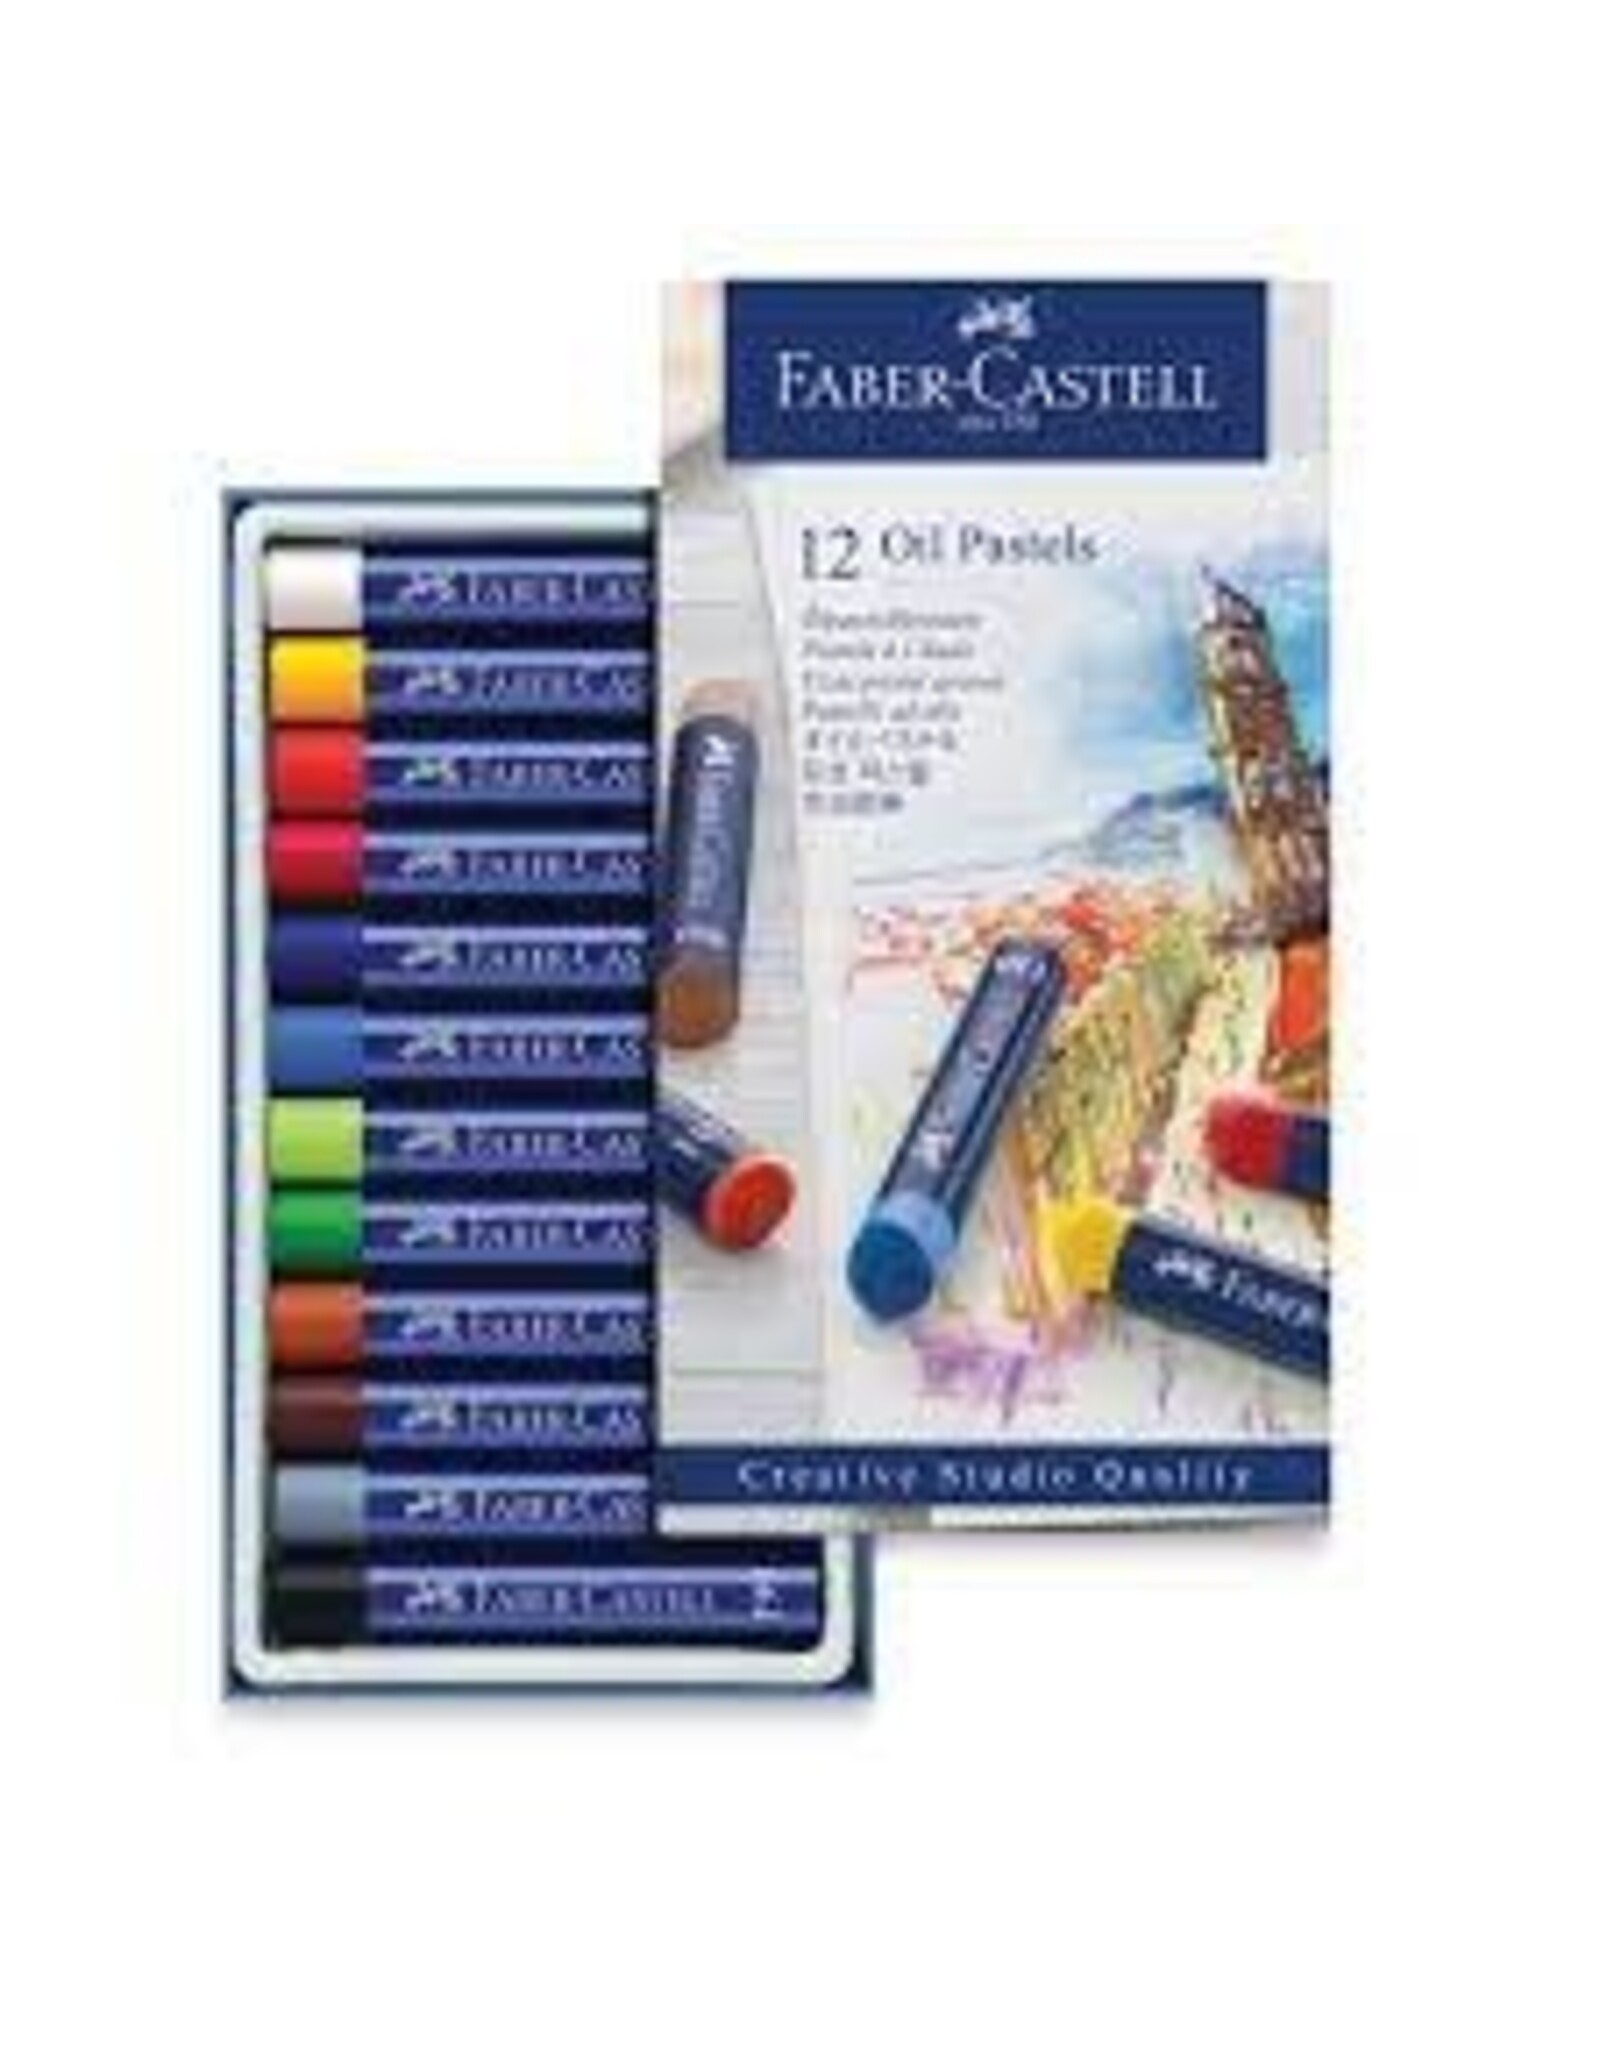 Faber-Castell Oil Pastel Crayon Cardboard box - 12ct